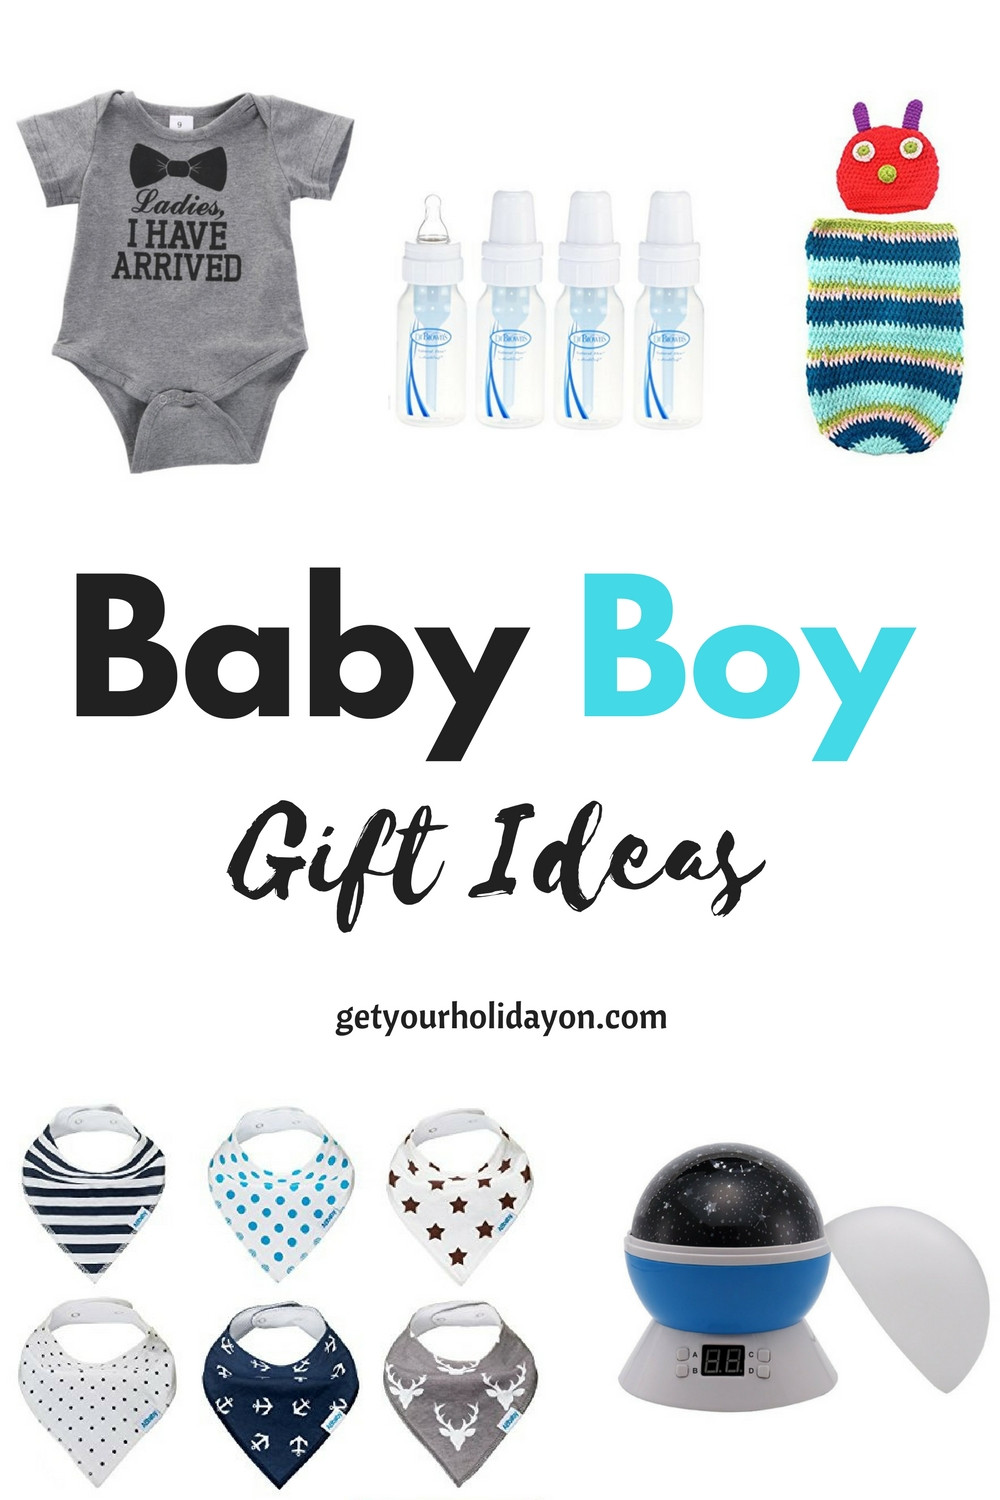 Baby Boy Christmas Gift Ideas
 Baby Boy Gift Ideas • Get Your Holiday